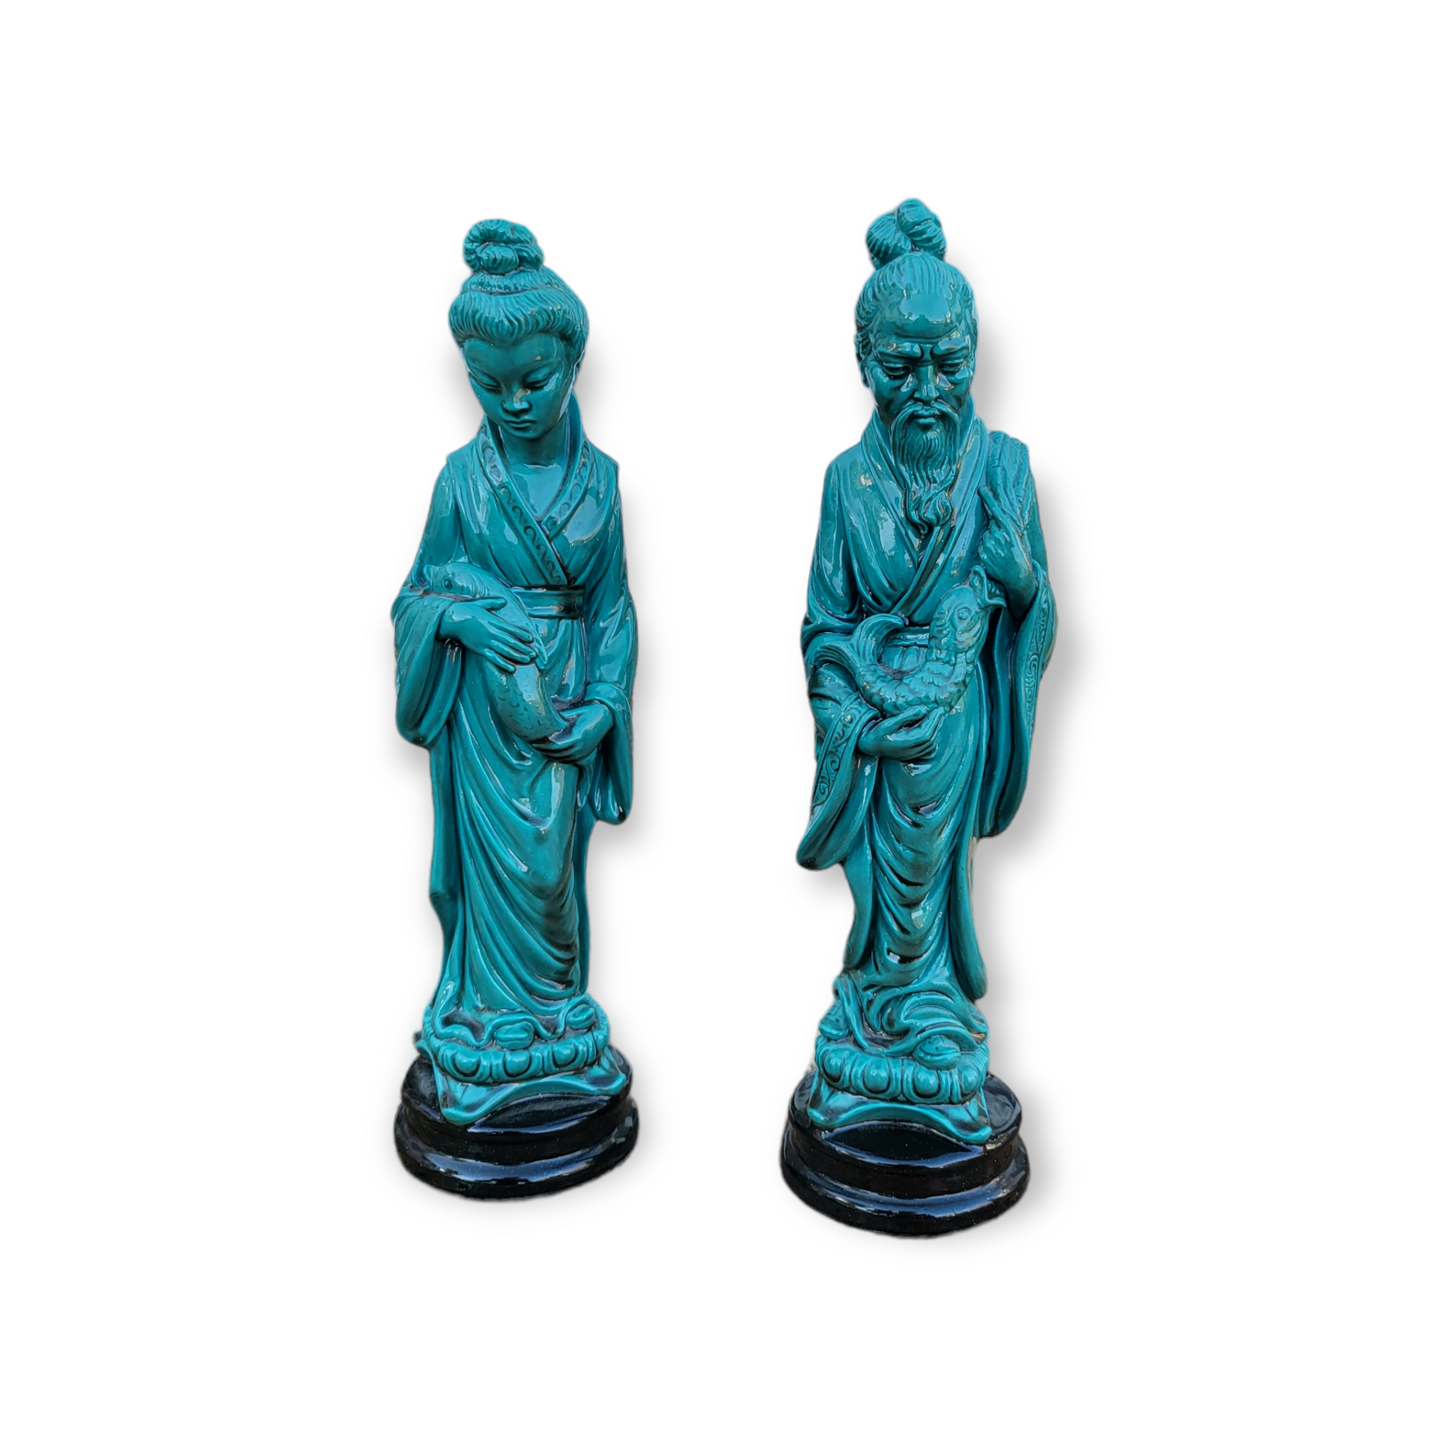 Pair of Vintage Asian Statues by A. Gianelli - Signed